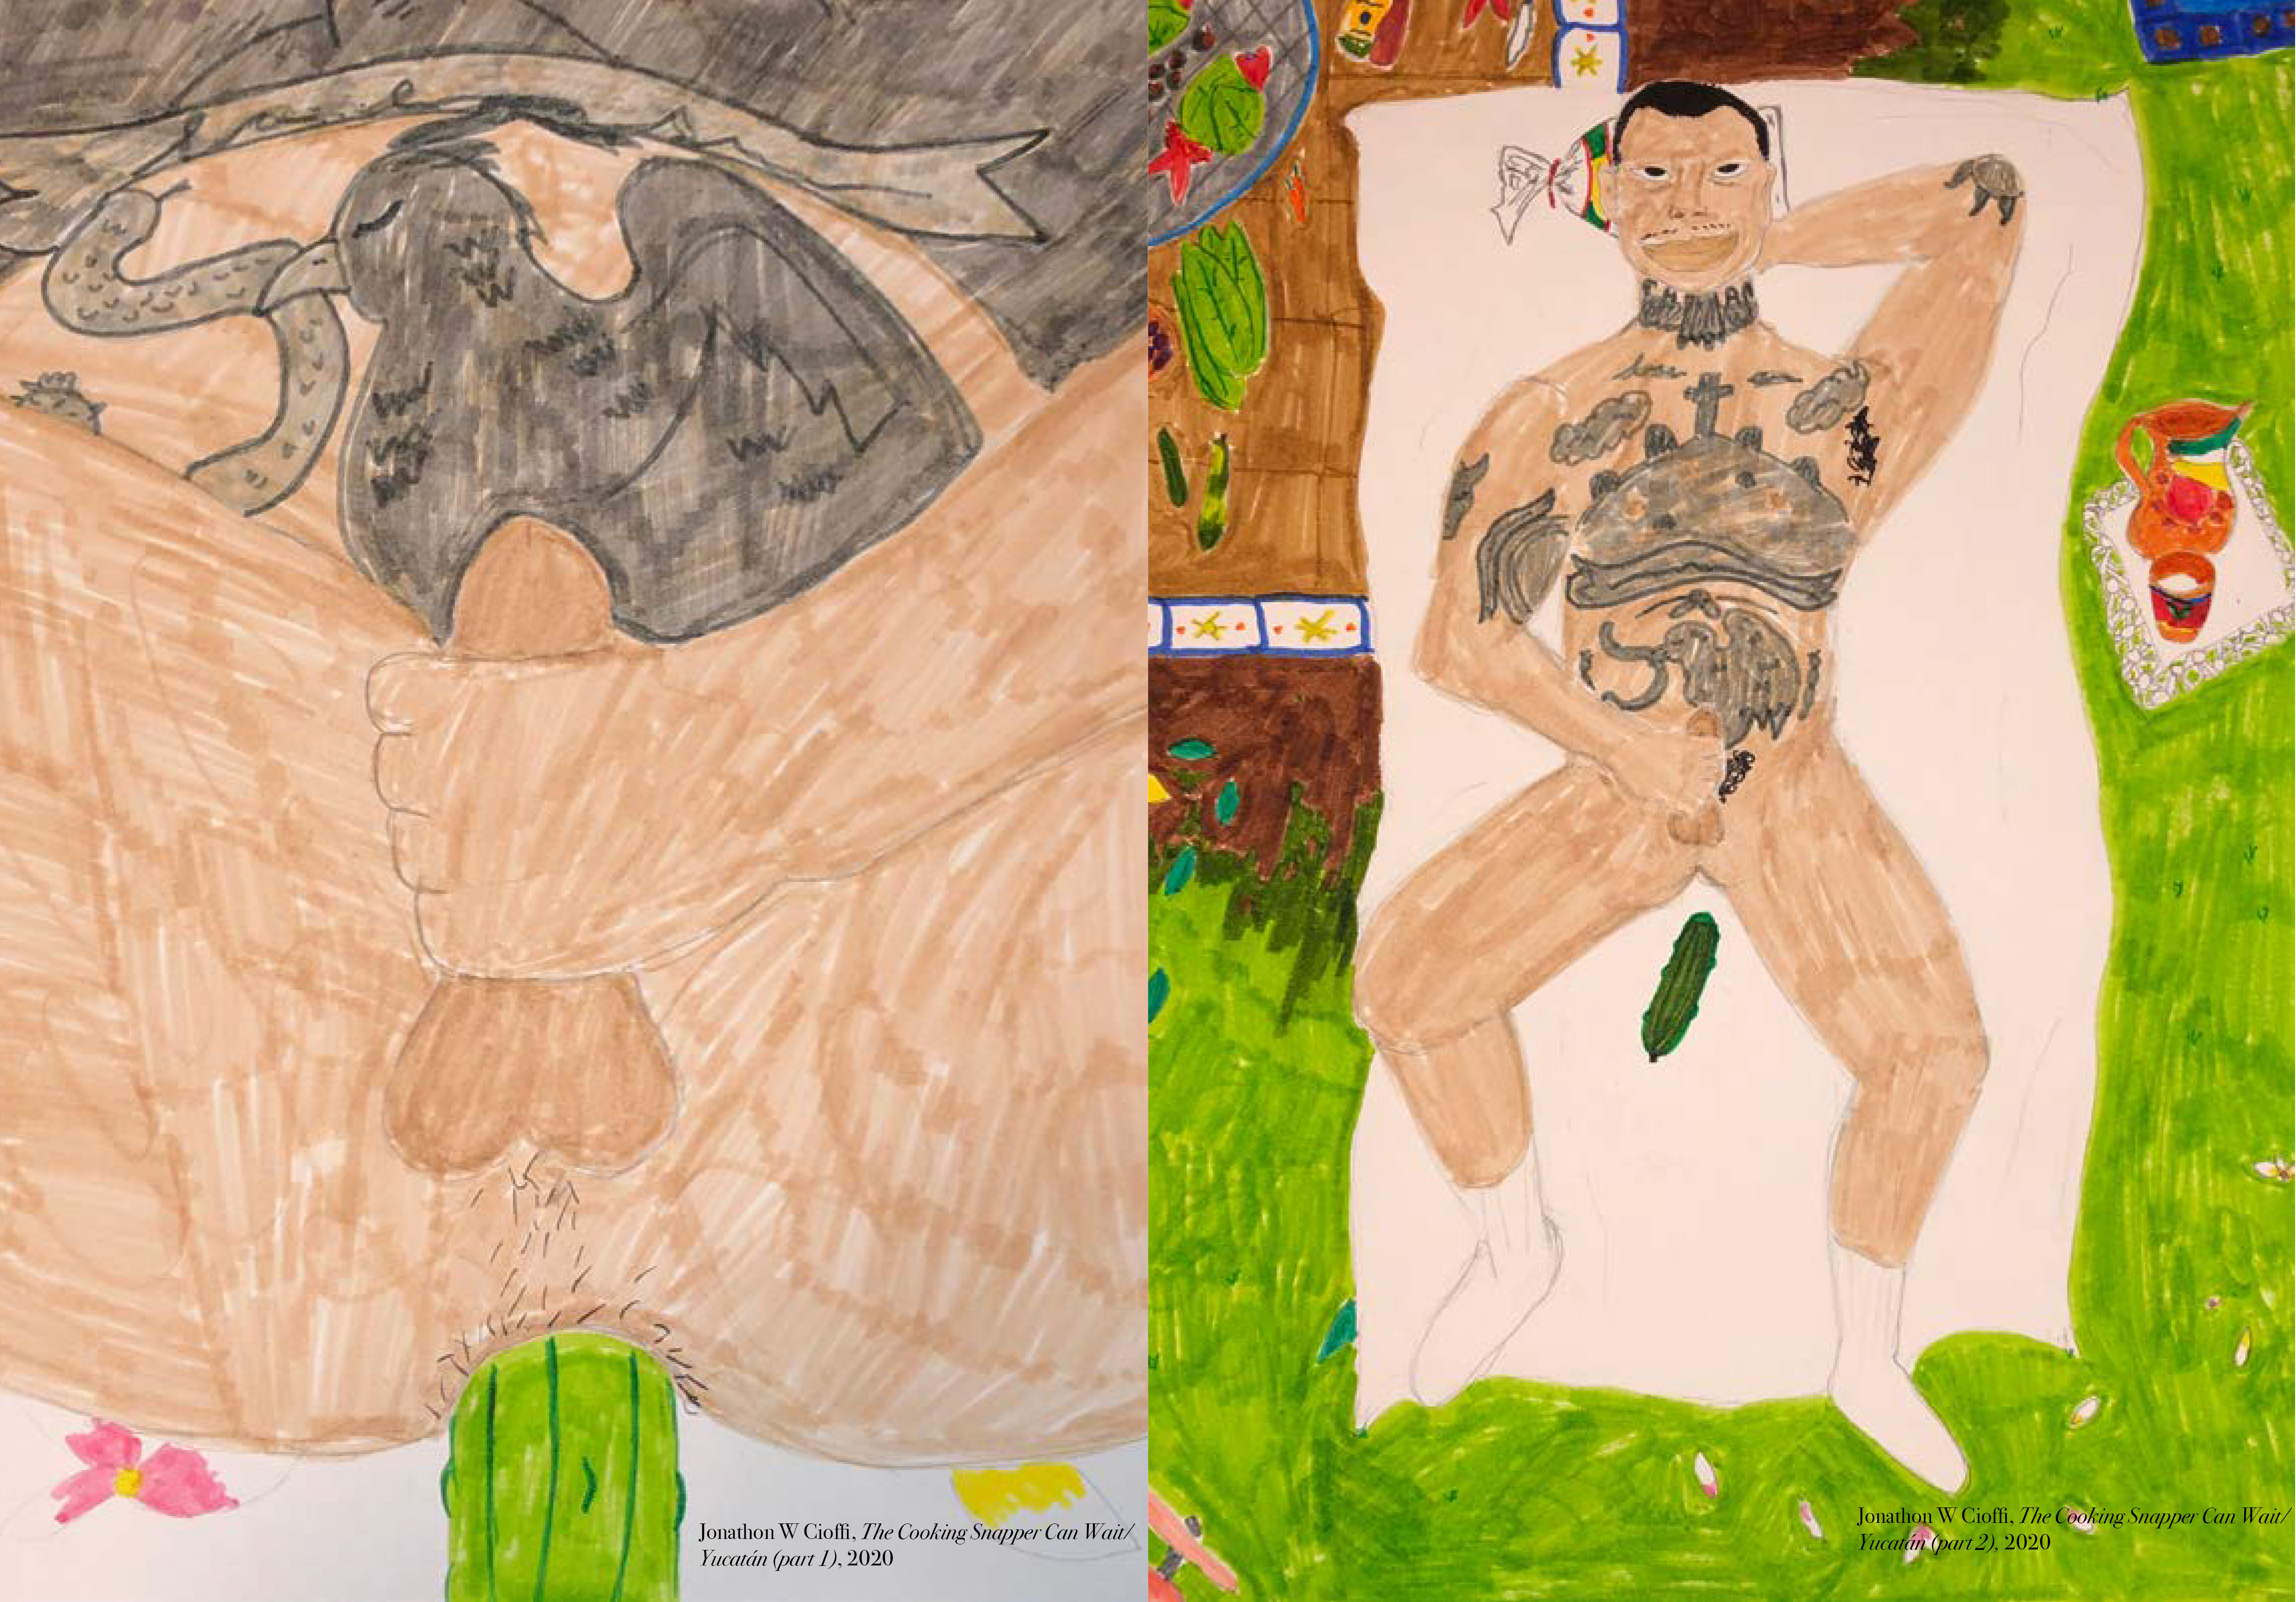 Page left: In this drawing, between a pair of spreadeagled thighs, a hand encircles an erect penis while a green pickle is inserted into the anus. The drawing is composed with bold-colored, thick-tipped markers. Page right: In this drawing, a nude man is lying down on a white sheet. There is an orange pitcher and glass by his side. Some vegetables and assorted produce are on his other side. The tattoo on his chest is of a graveyard. The tattoo on his stomach is of a bird with a snake in its mouth. His left arm supports their head while the right arm encircles an erect penis. A green pickle is positioned between the legs near the anus. The drawing is composed with bold-colored, thick-tipped markers.